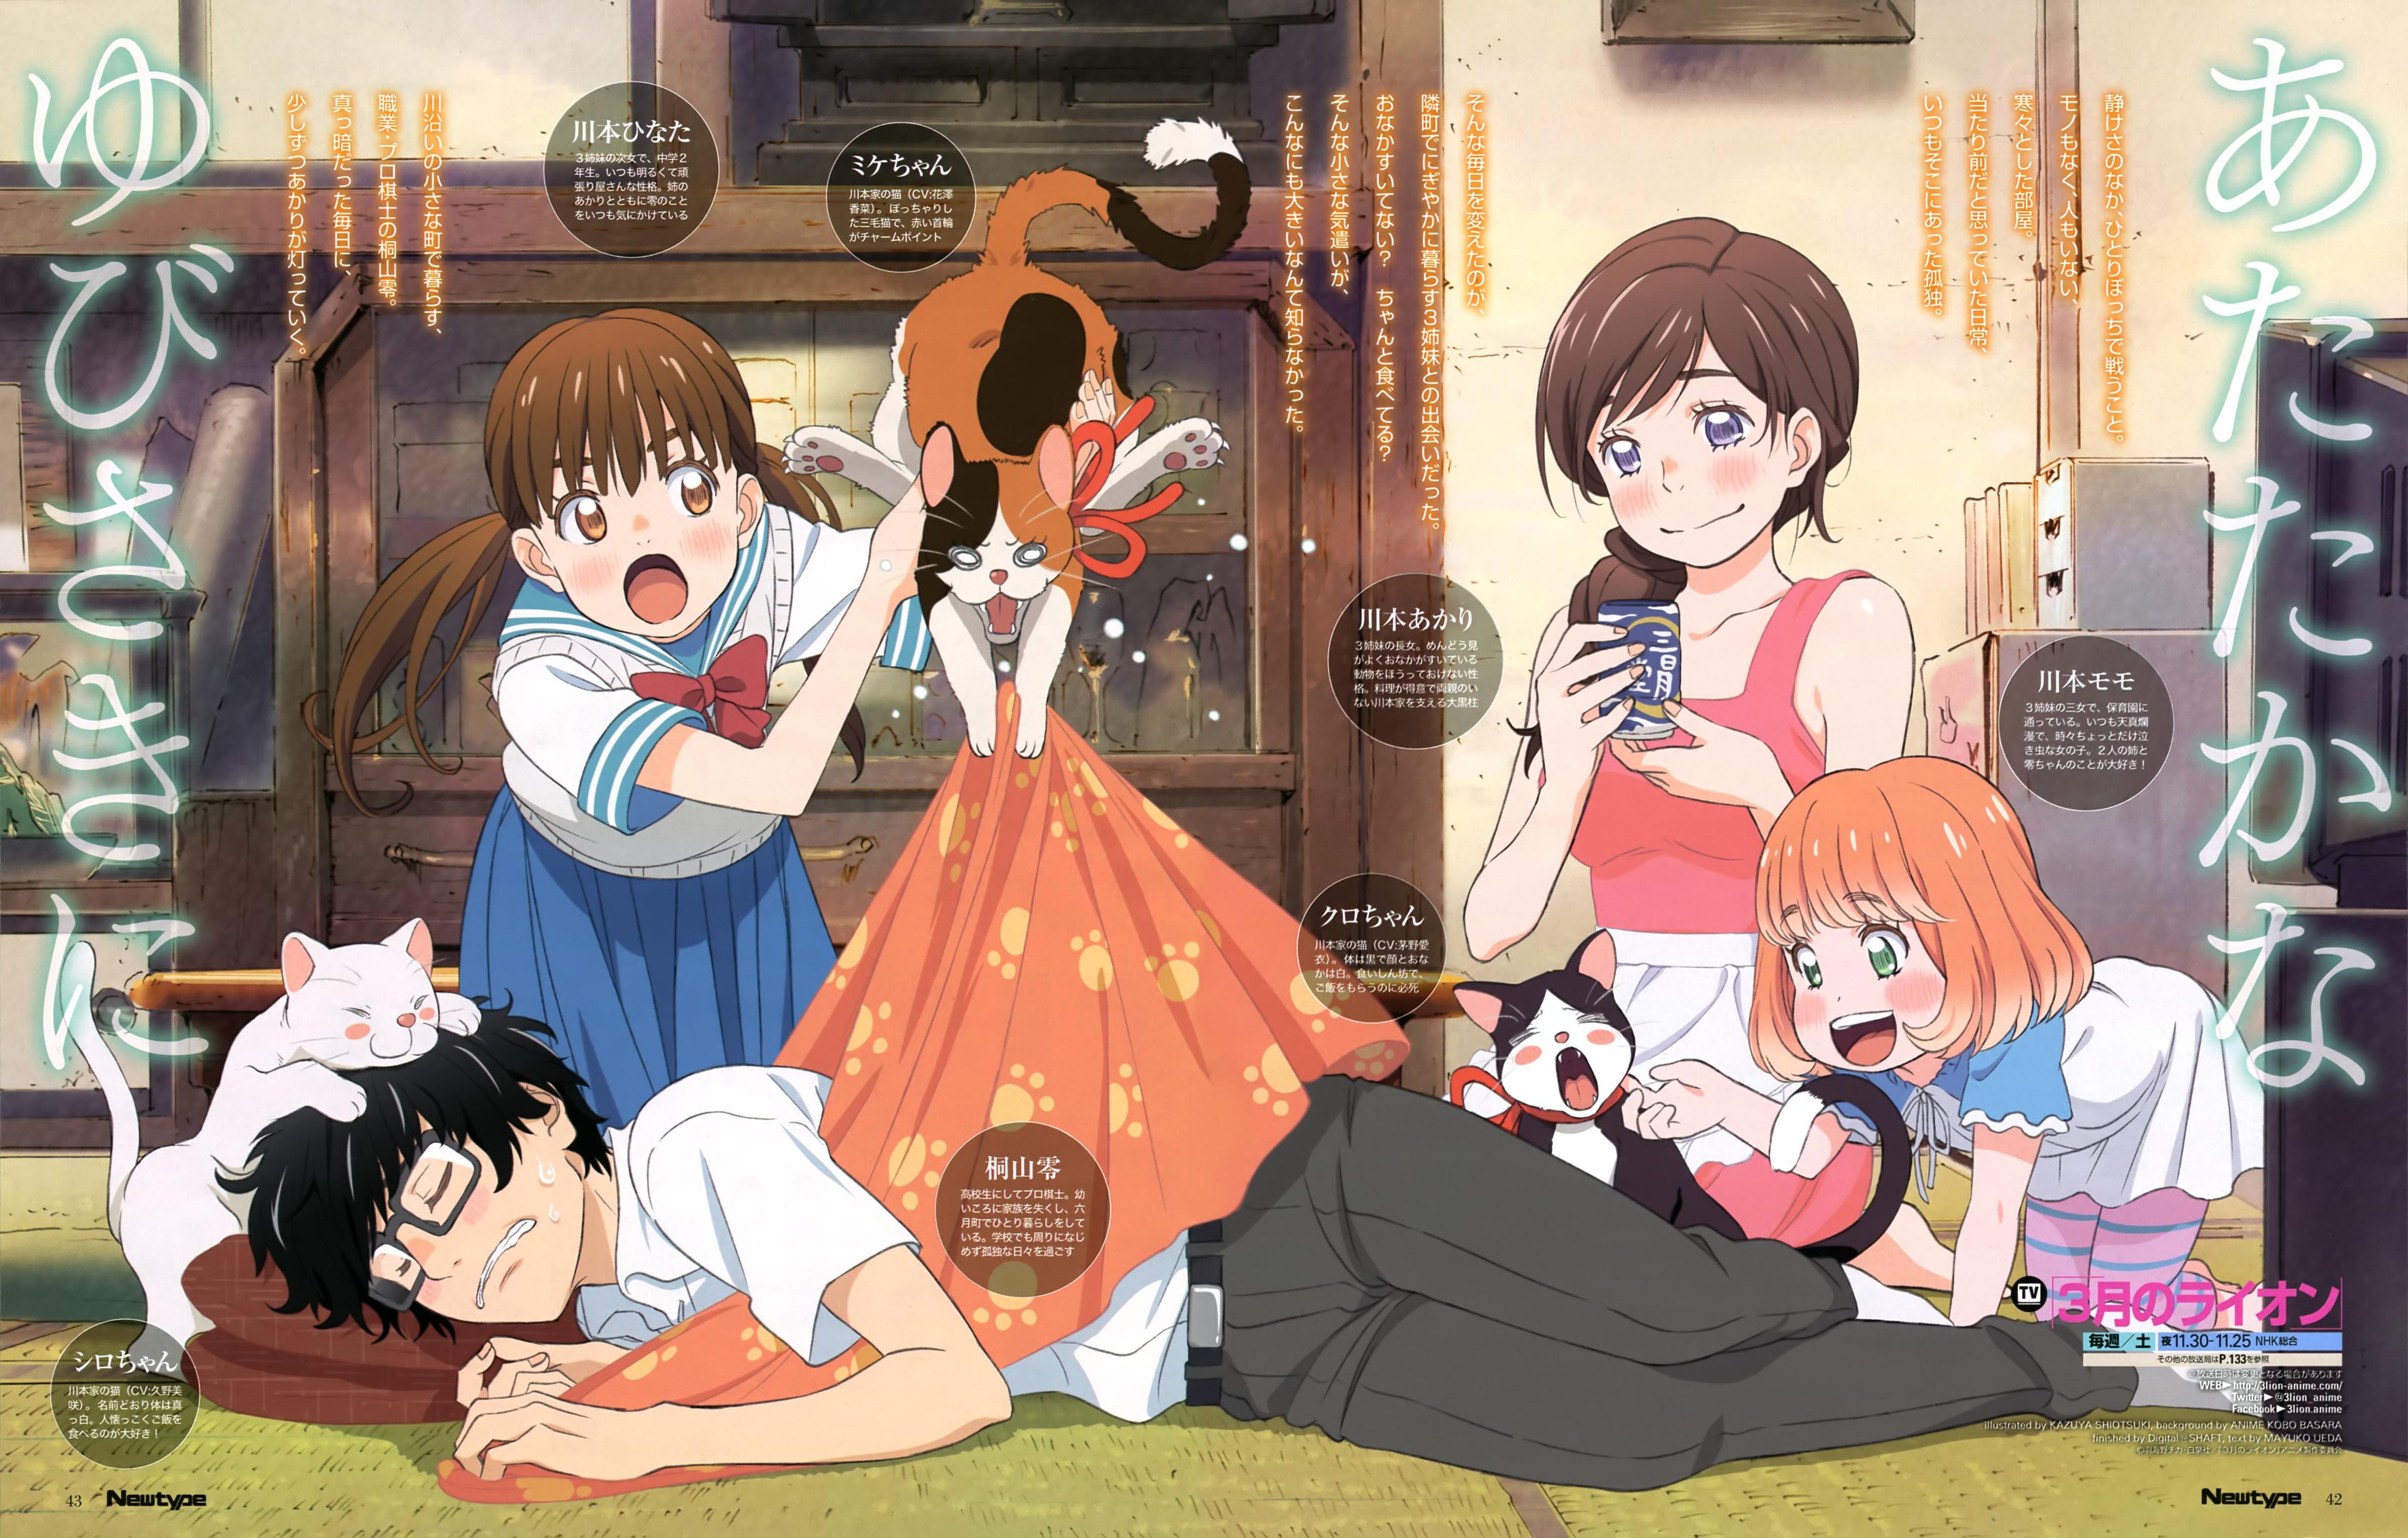 The Dangers in My Heart TV Anime Spreads a Love Wave in Creditless